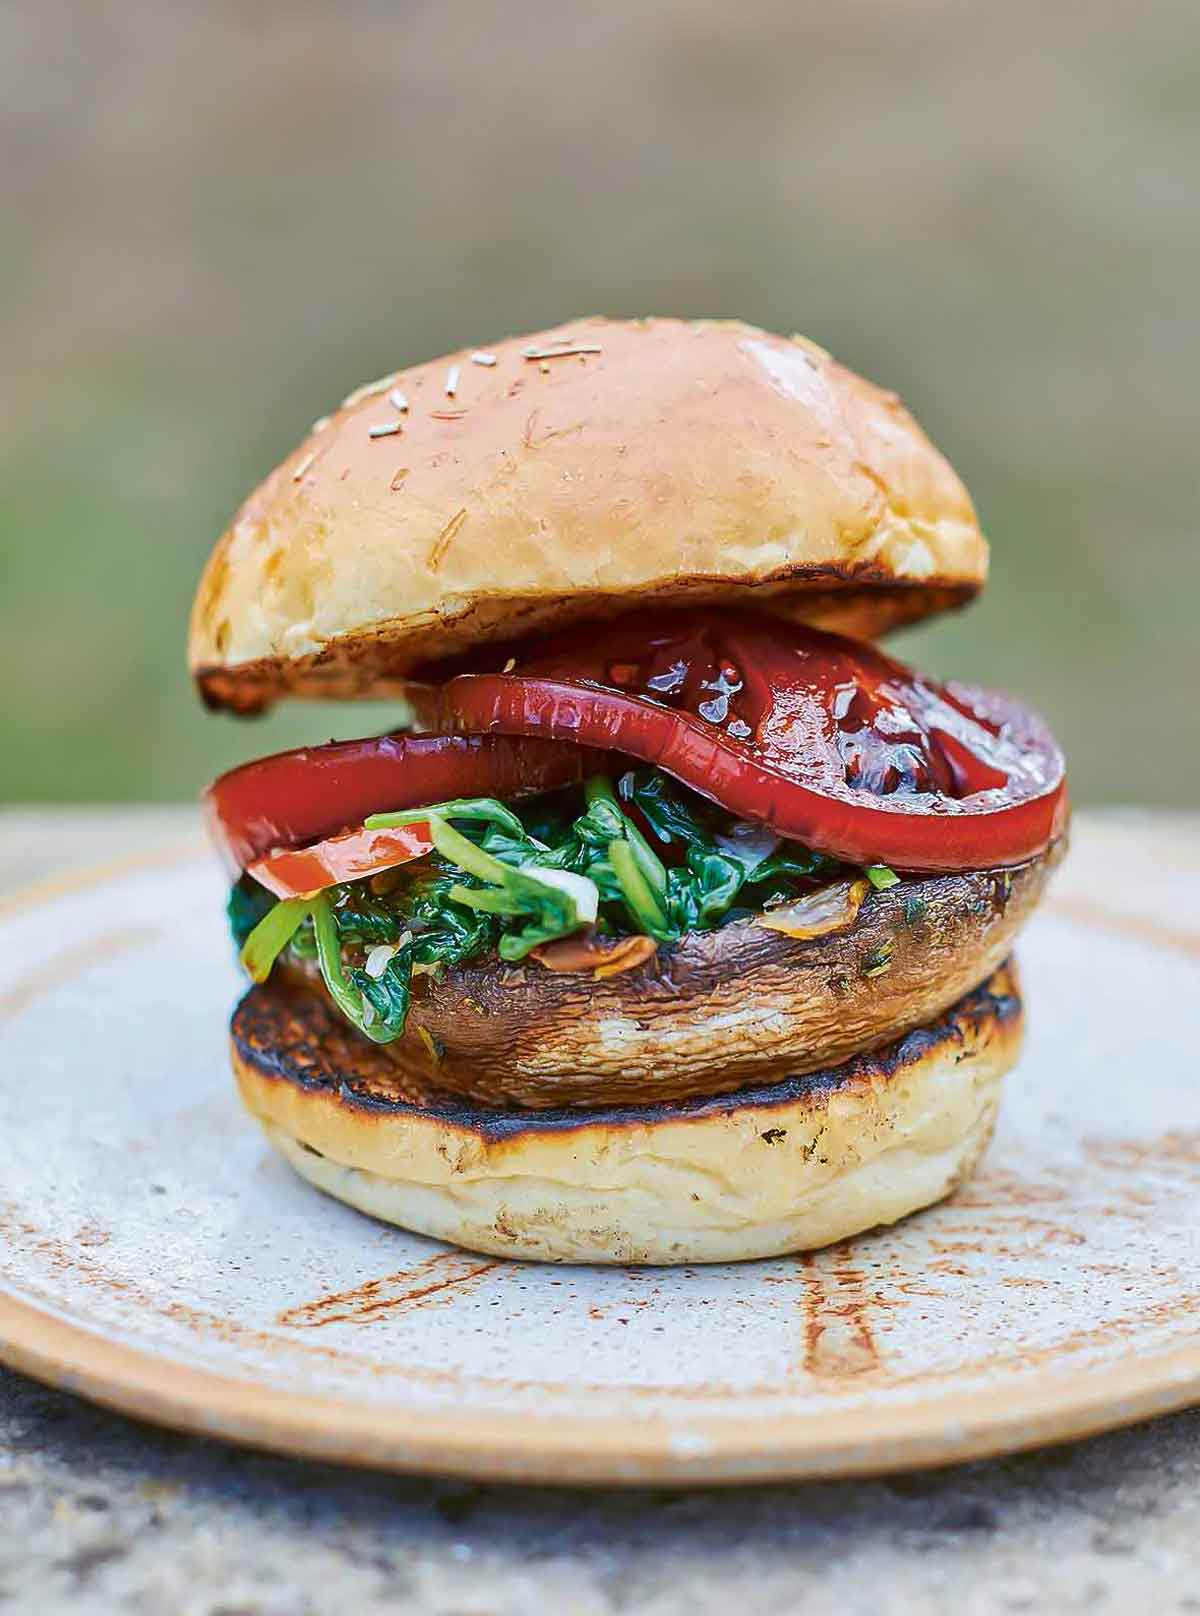 A spinach, tomato, and mushroom burger on a grilled bun.